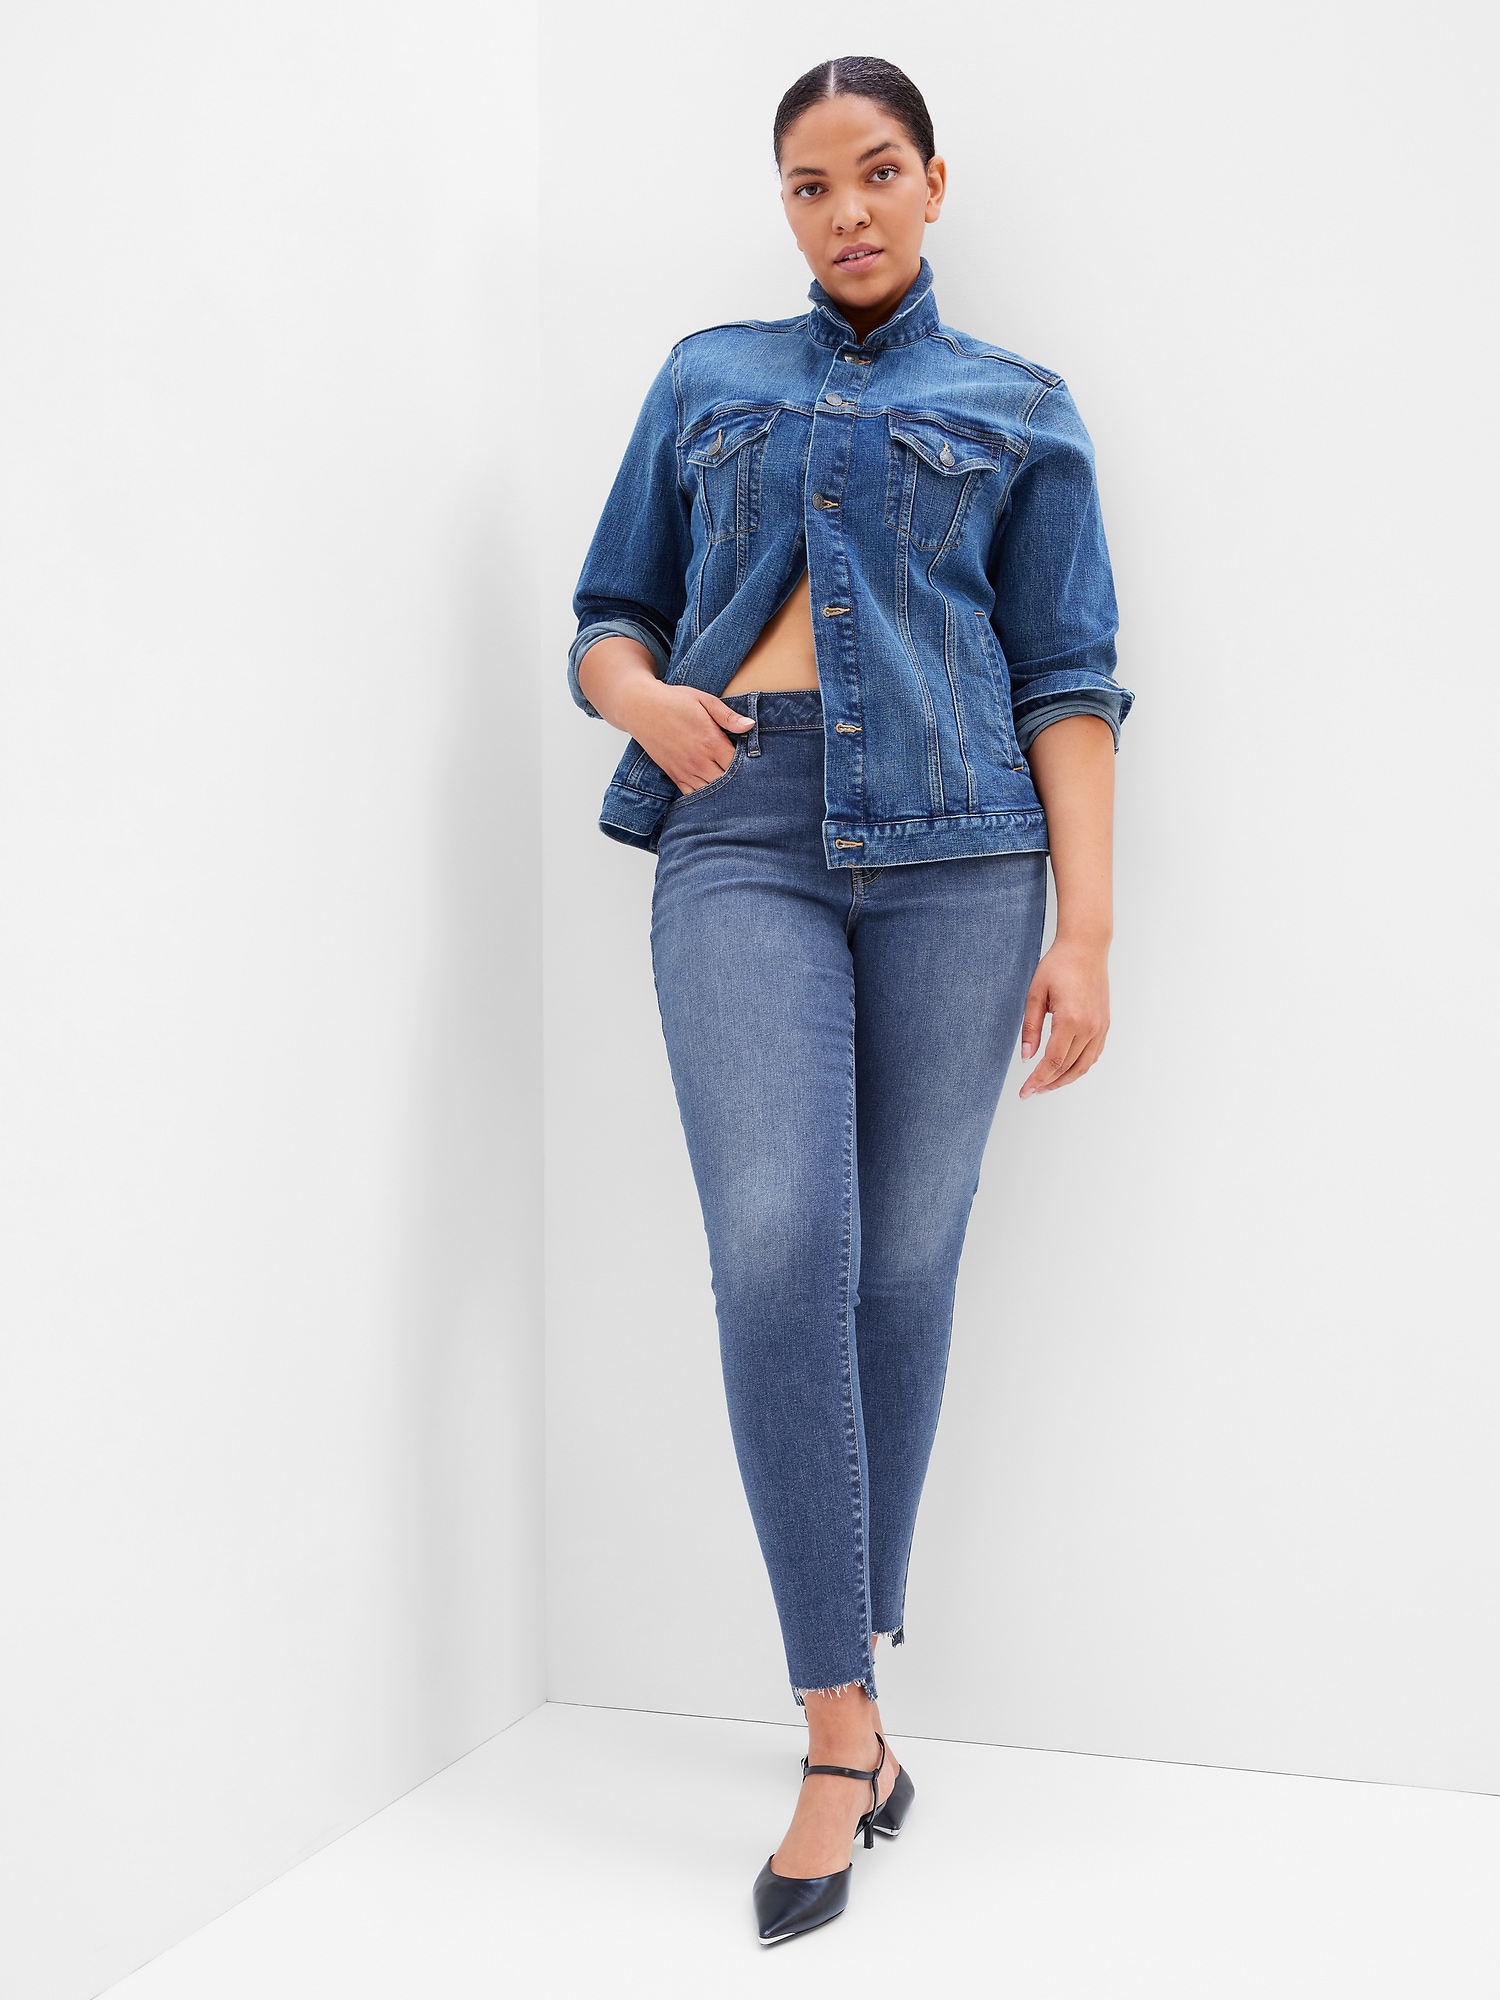 Buy Gap Pull-On Jeggings with Max Stretch from the Gap online shop